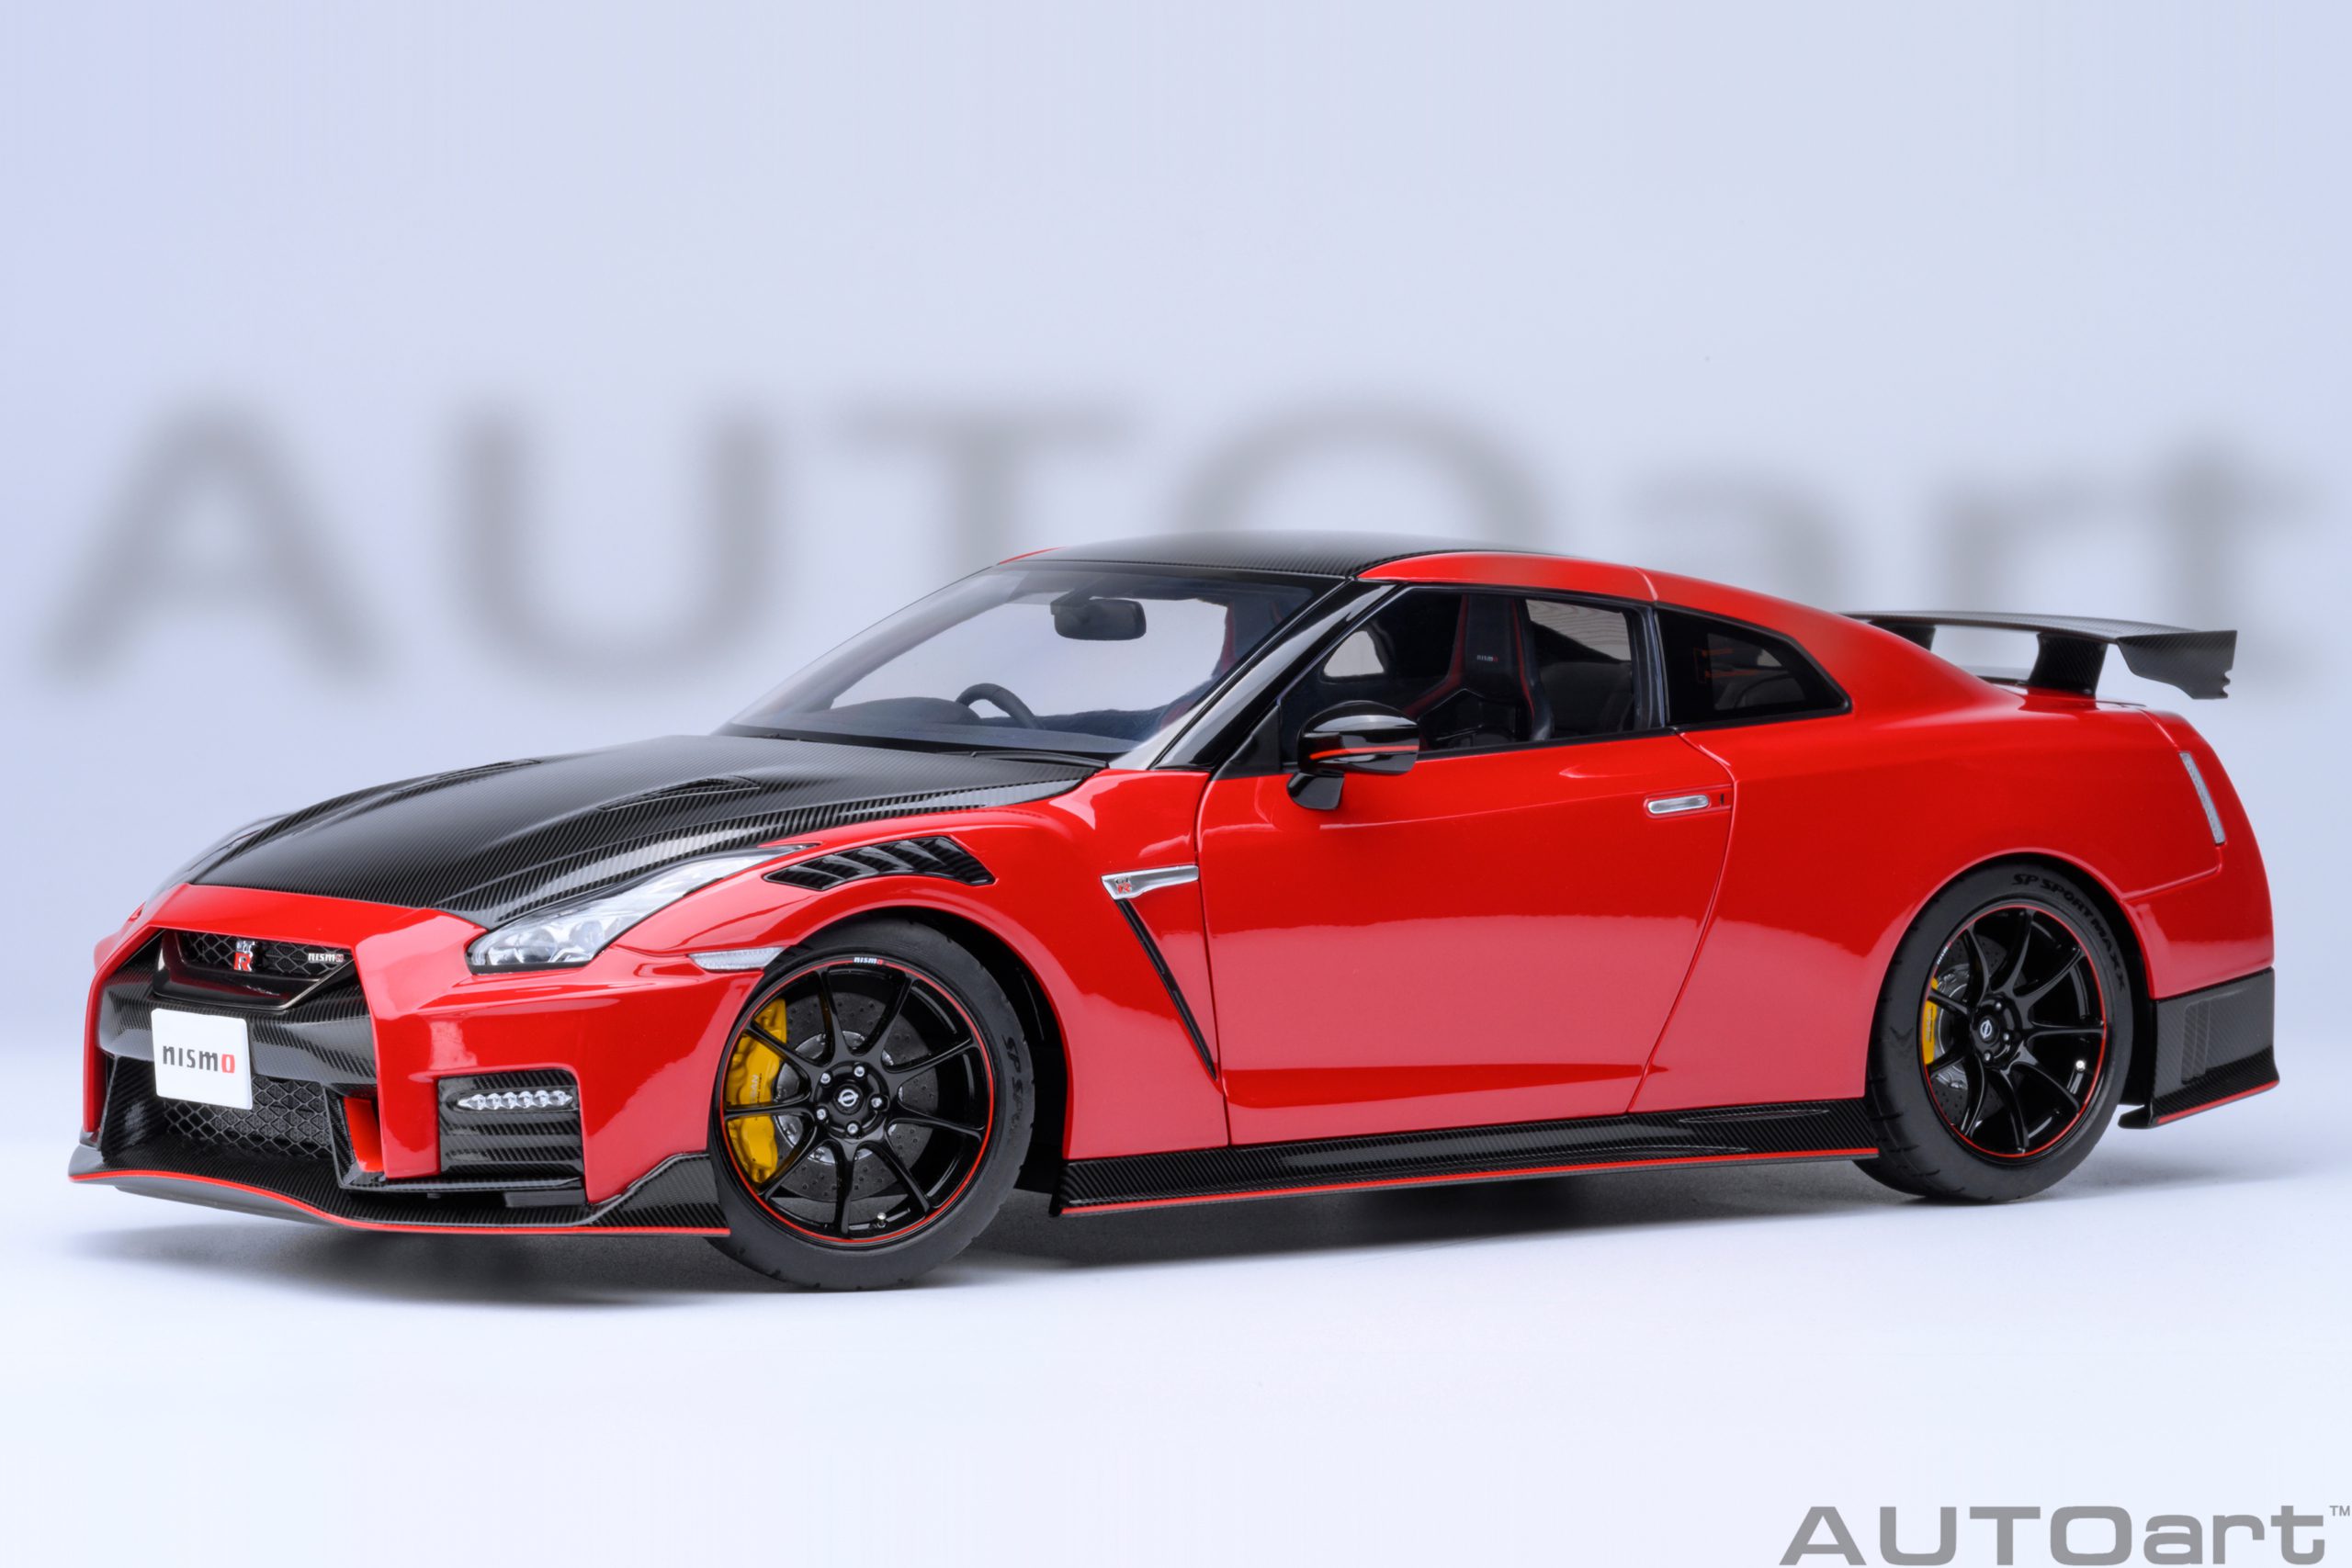 Nissan GT-R (R35) Nismo 2022 Special Edition (Vibrant Red) | AUTOart